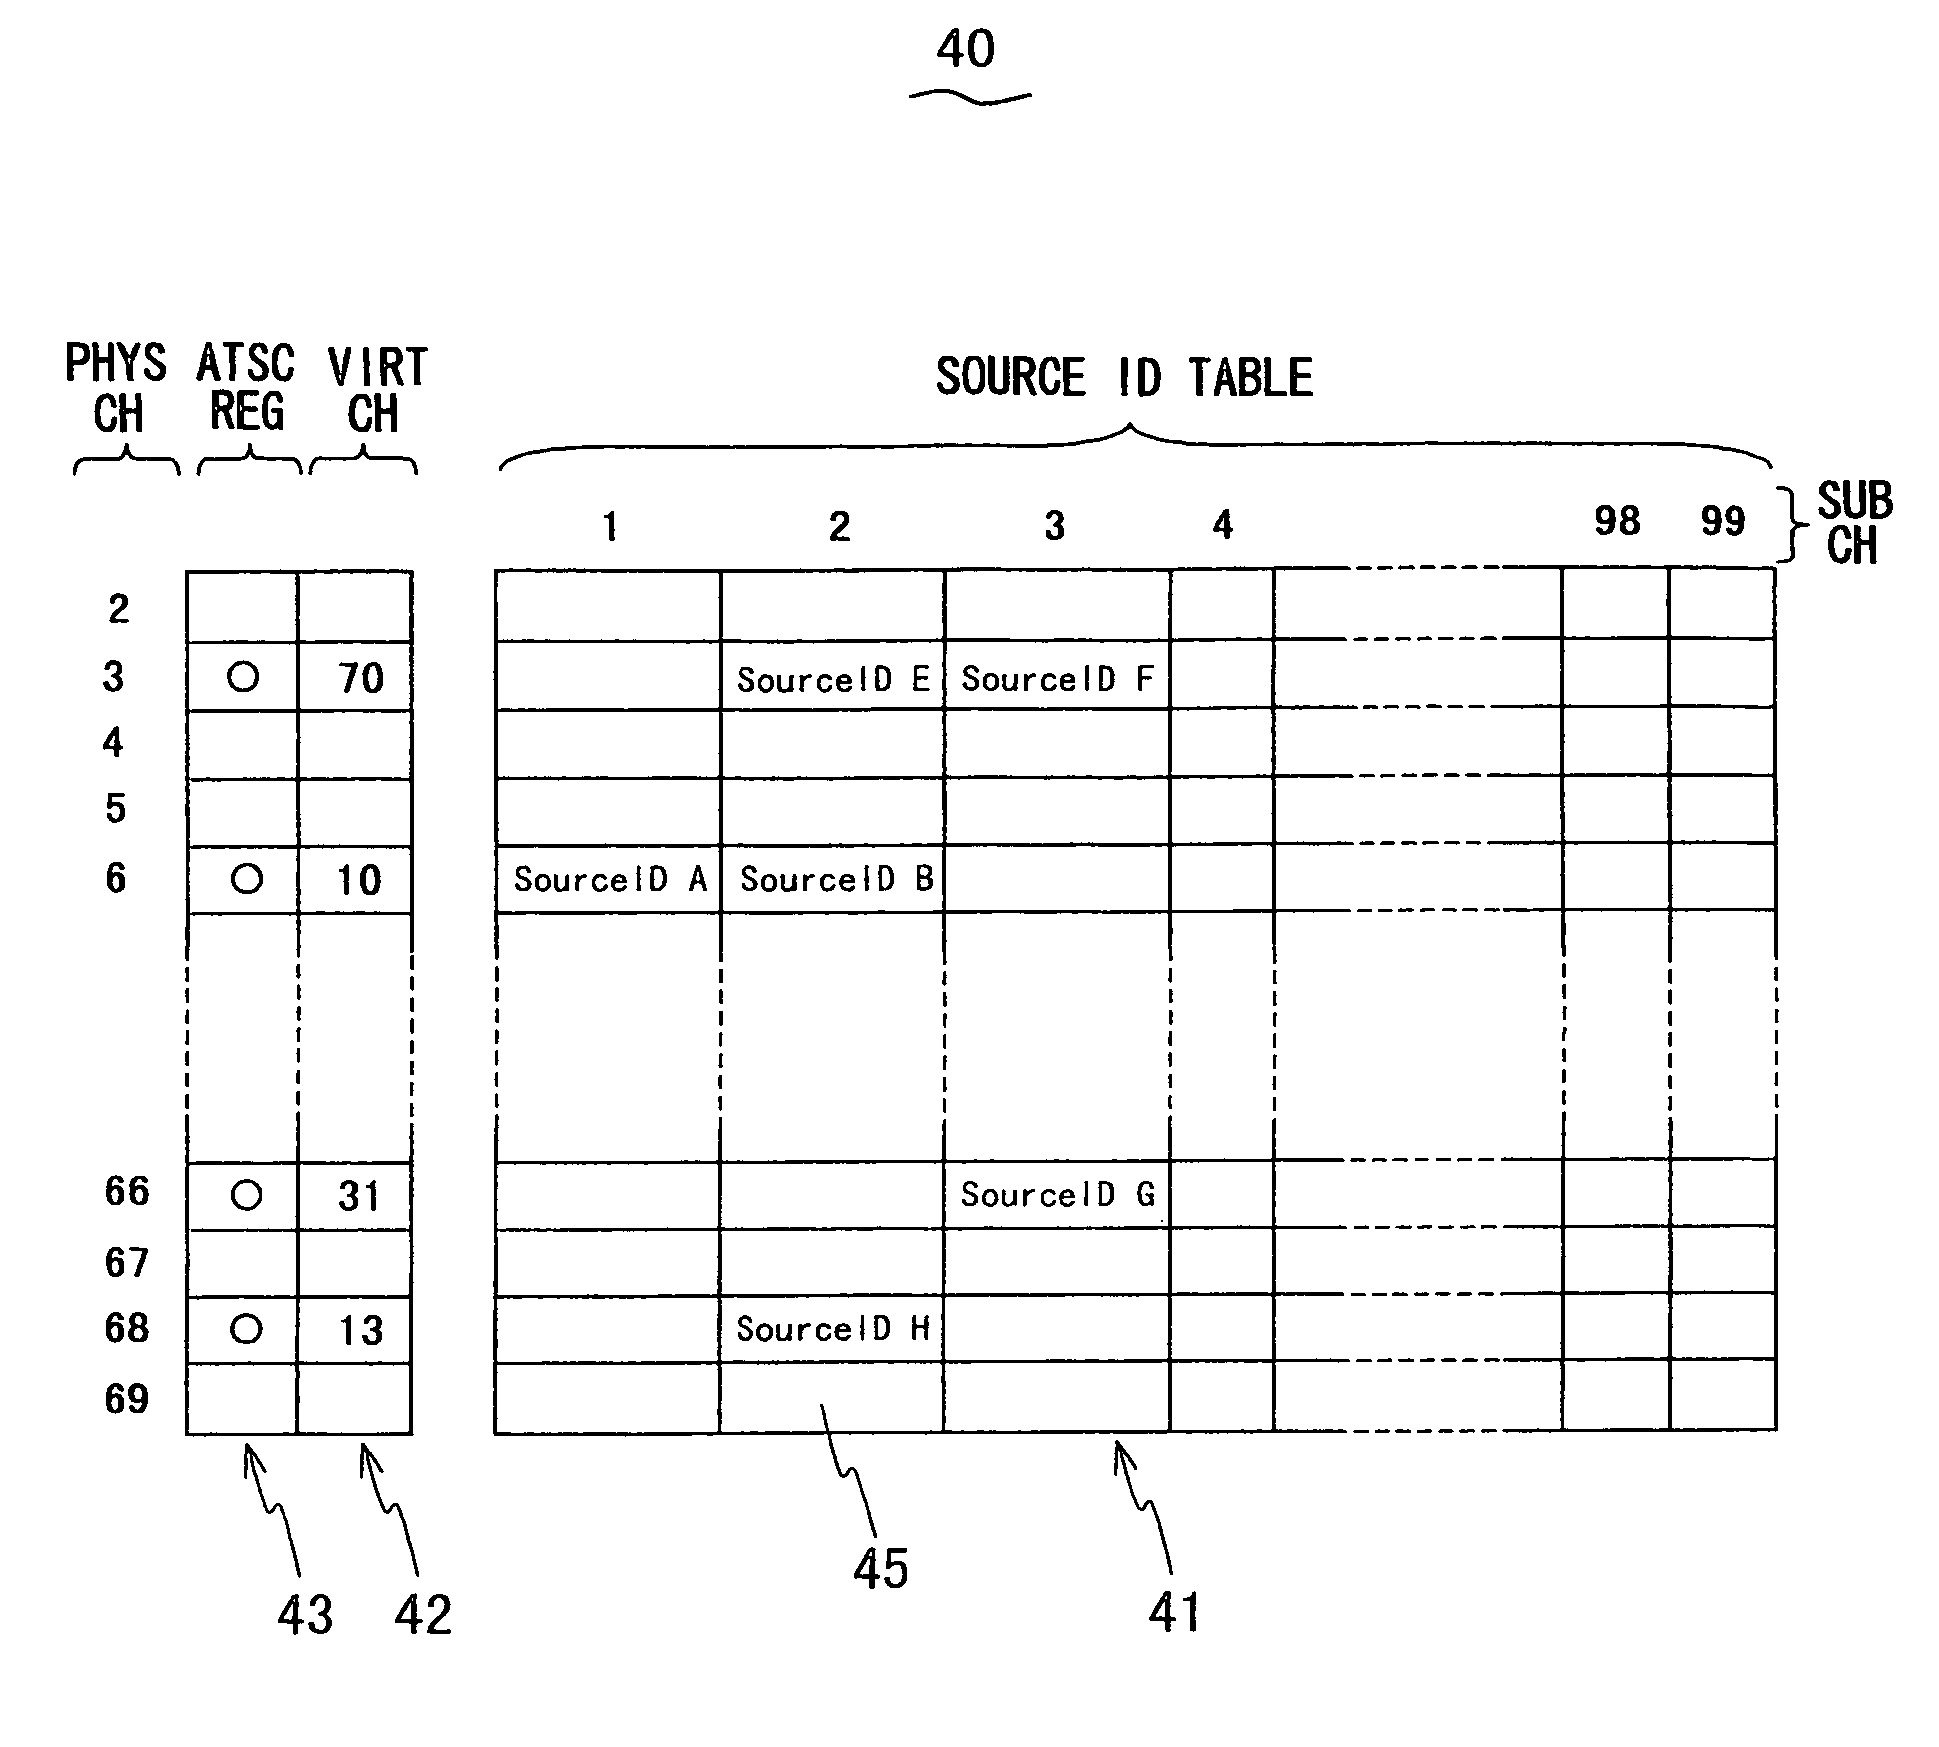 Digital/analogue TV receiver that renews a channel map using event information and virtual channel tables